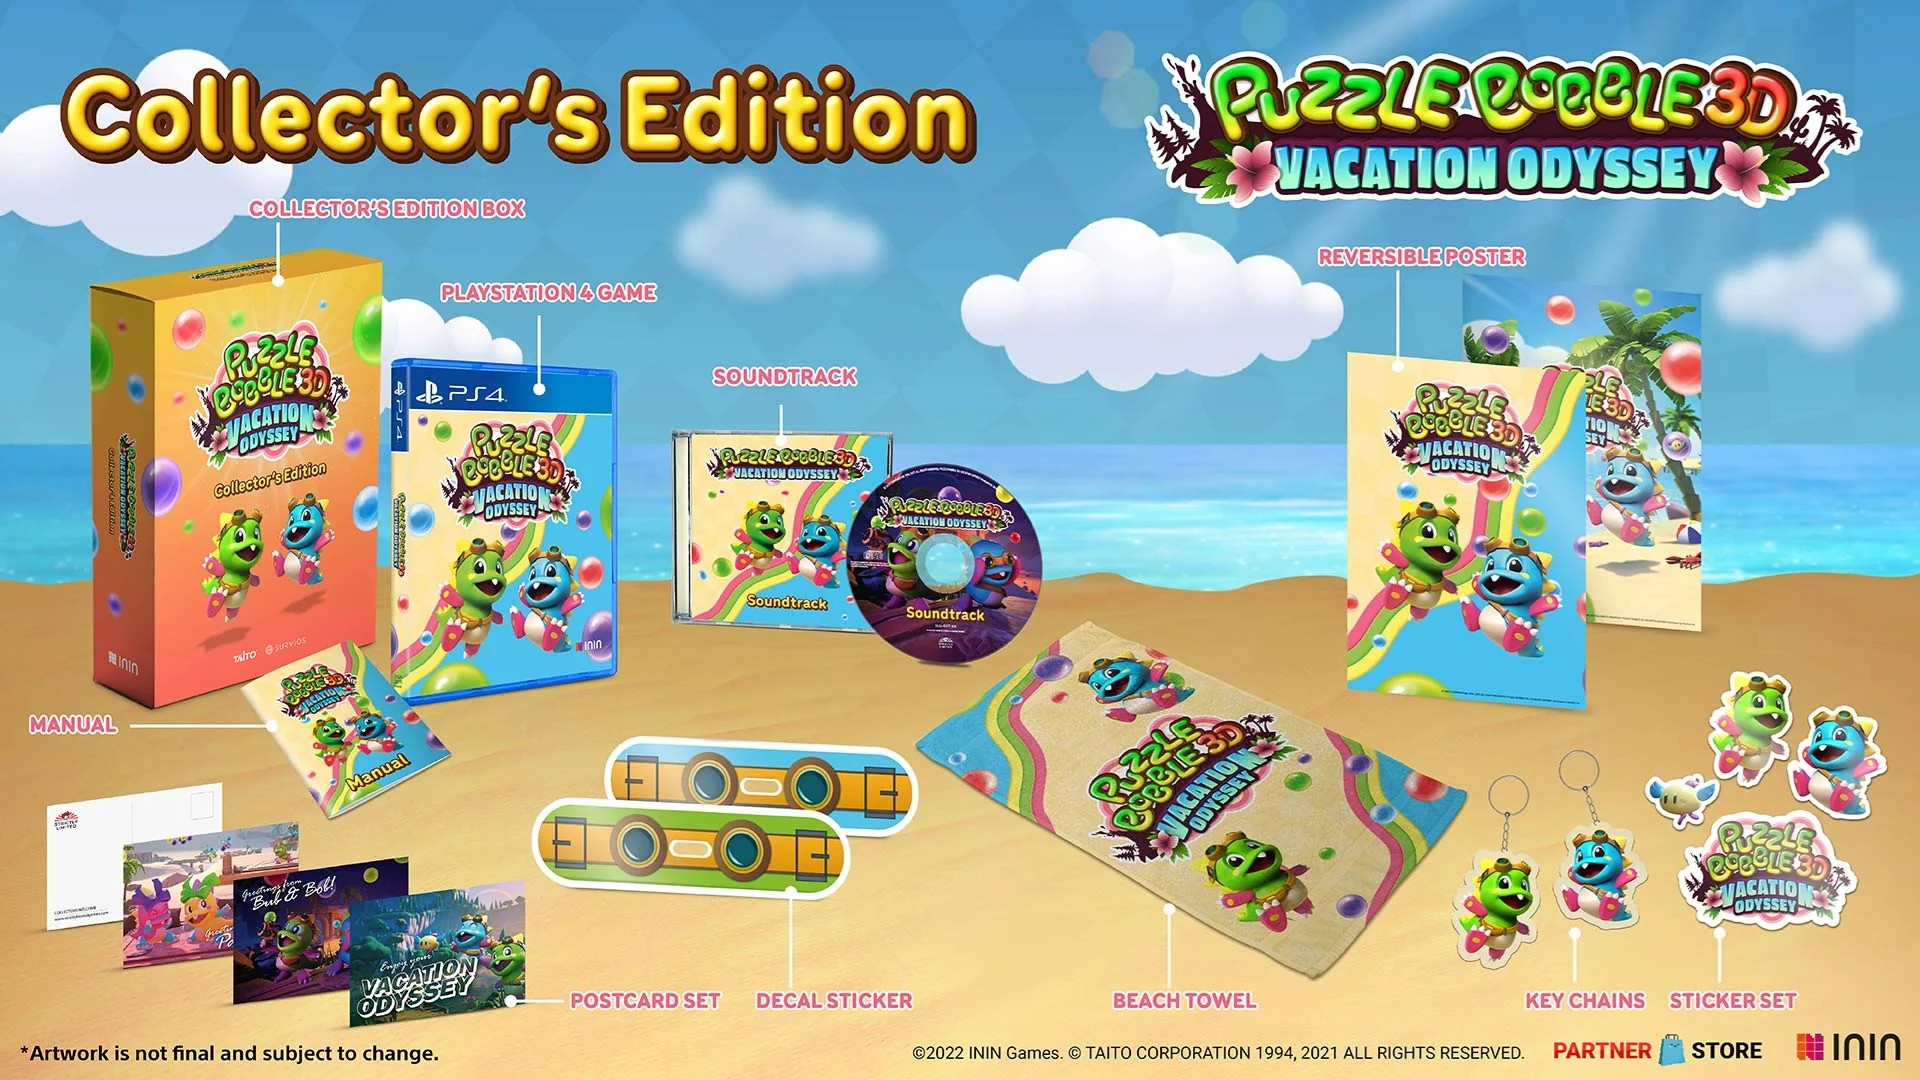 Puzzle Bobble 3D: Vacation Odyssey - Collector's Edition (Strictly Limited) (PS4), ININ Games